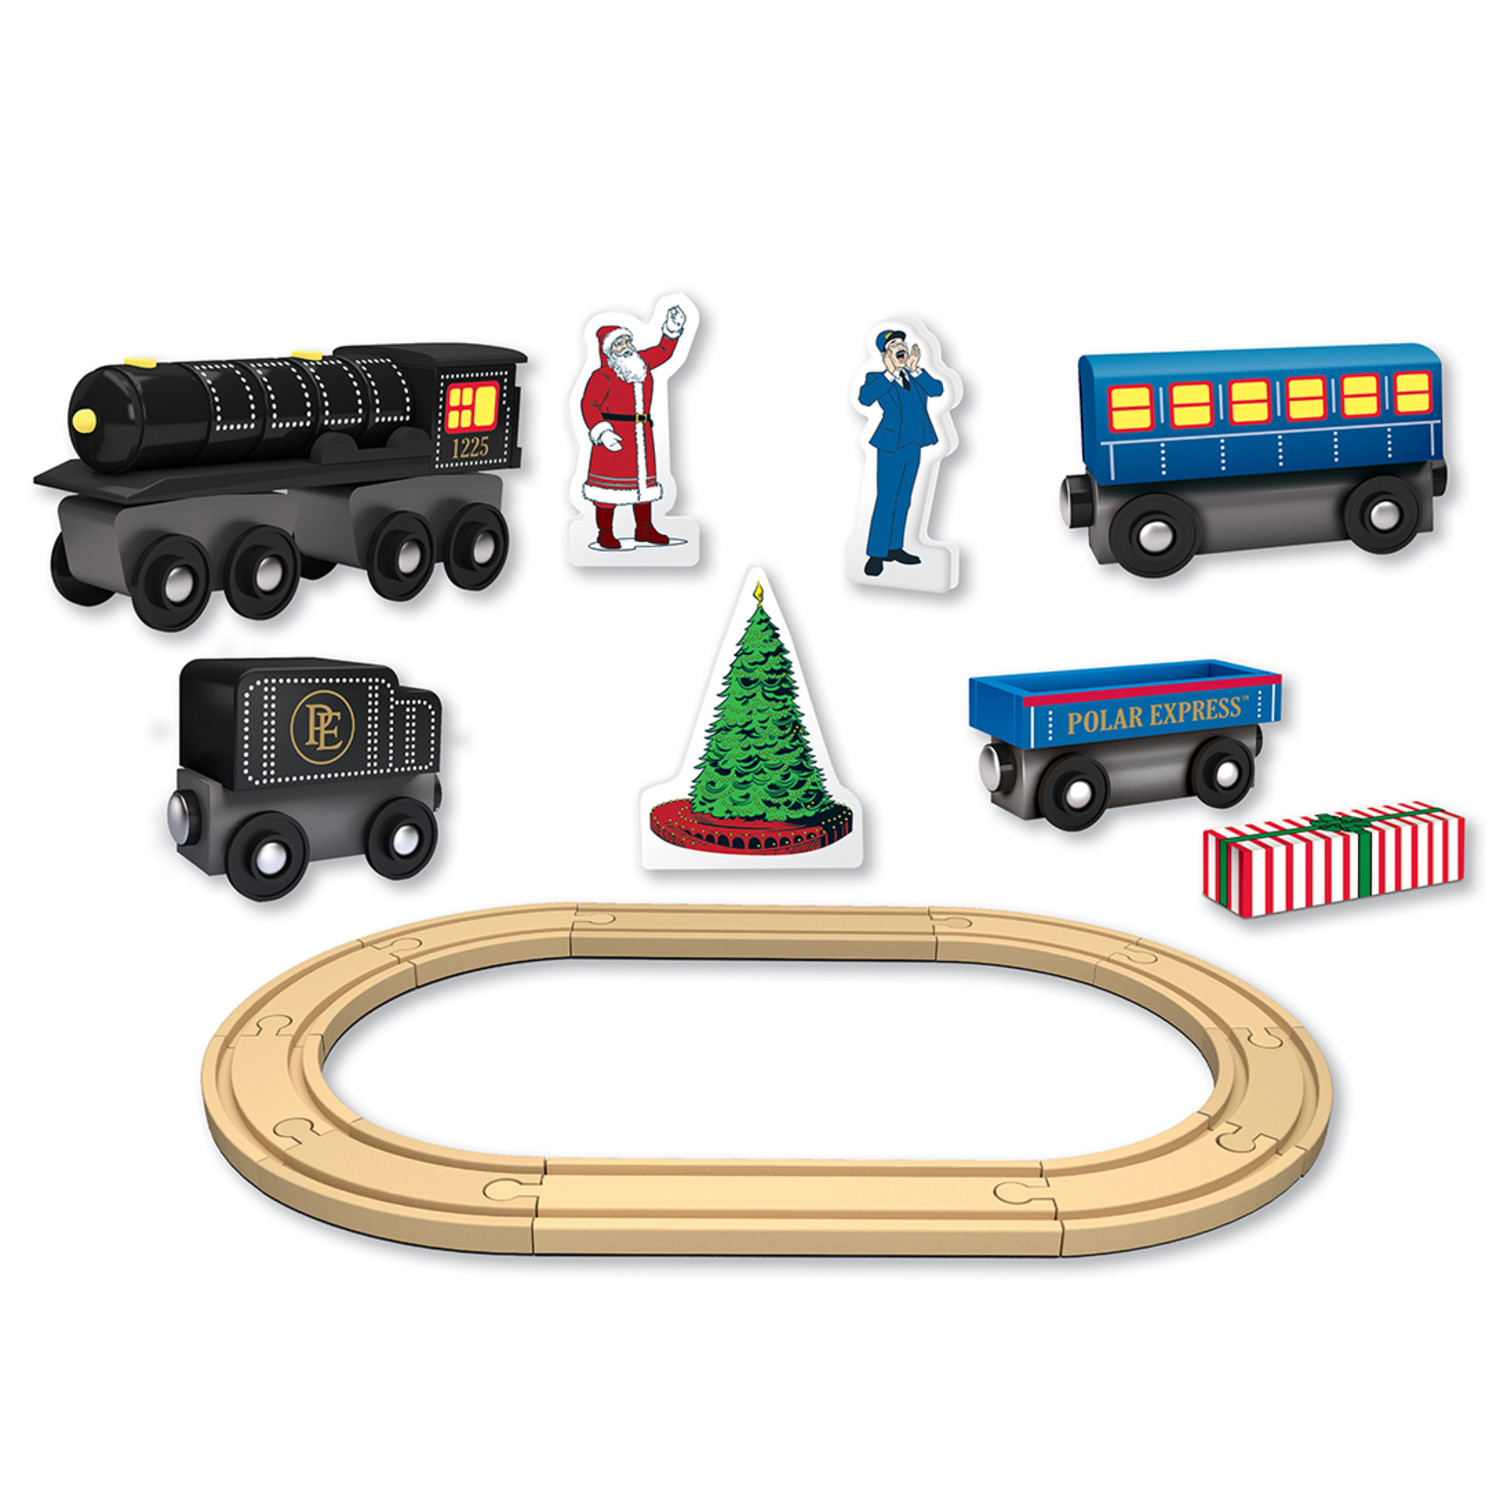 MasterPieces Wood Train Sets - The Polar Express 18 Piece Train Set - image 3 of 4